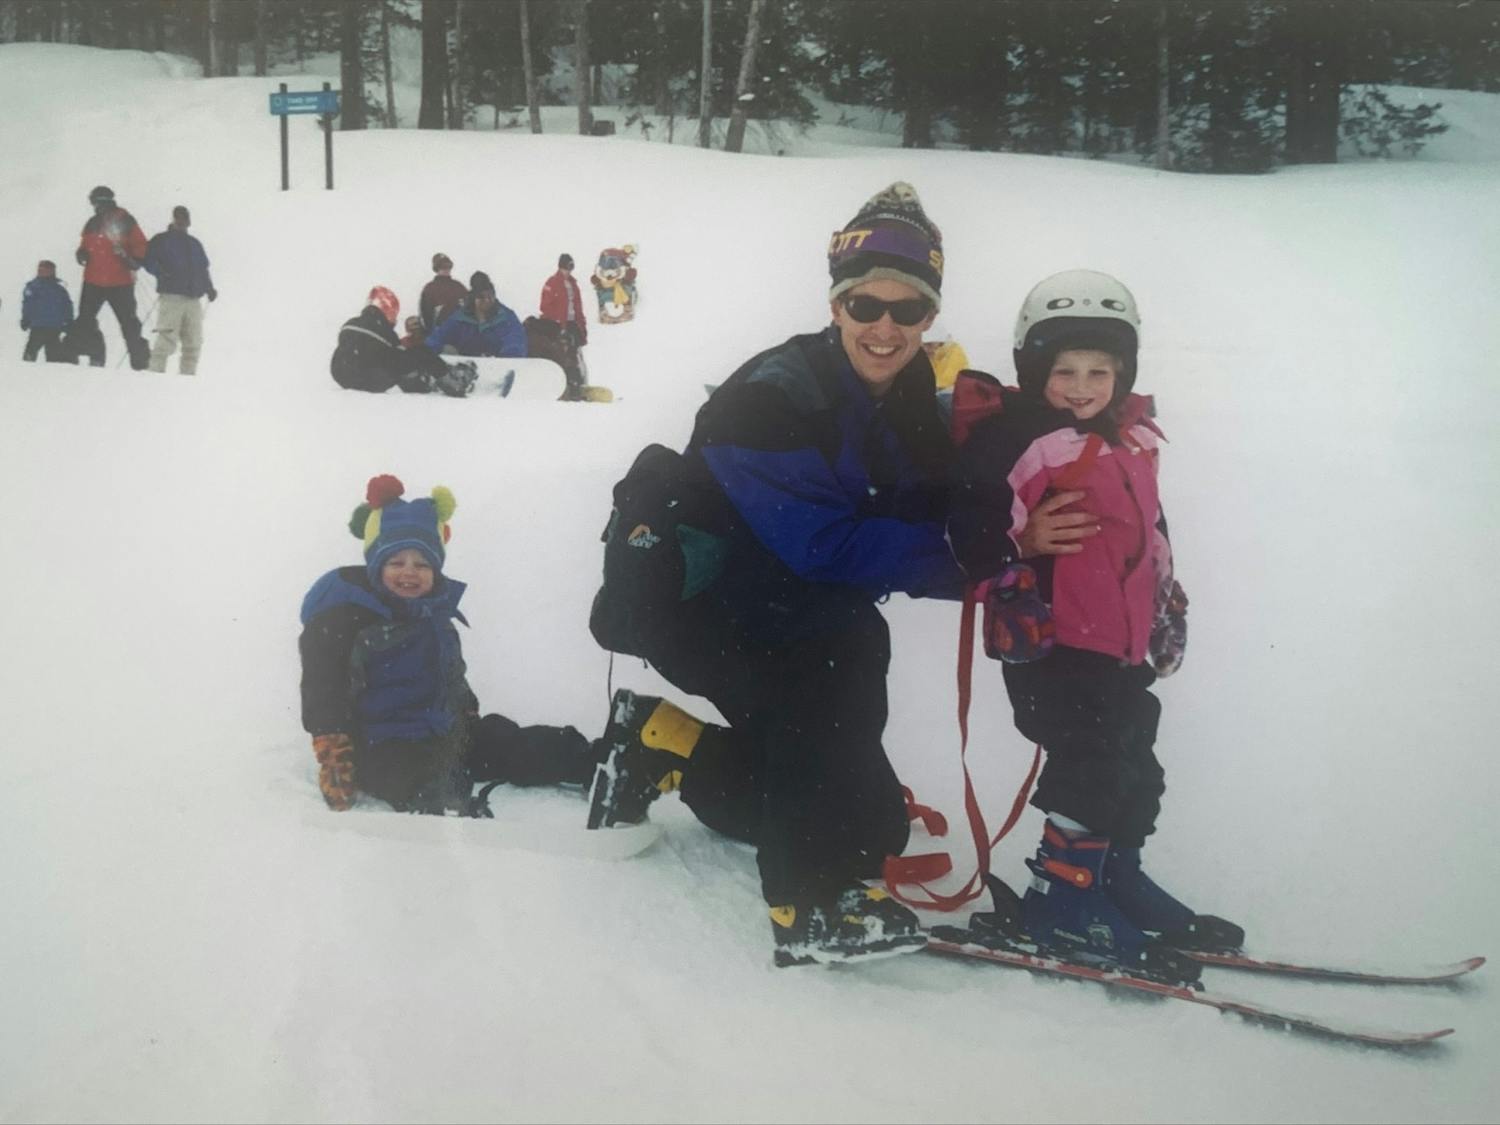 "To be a Kelly is to be a skier." Photo Courtesy of Allie Kelly.